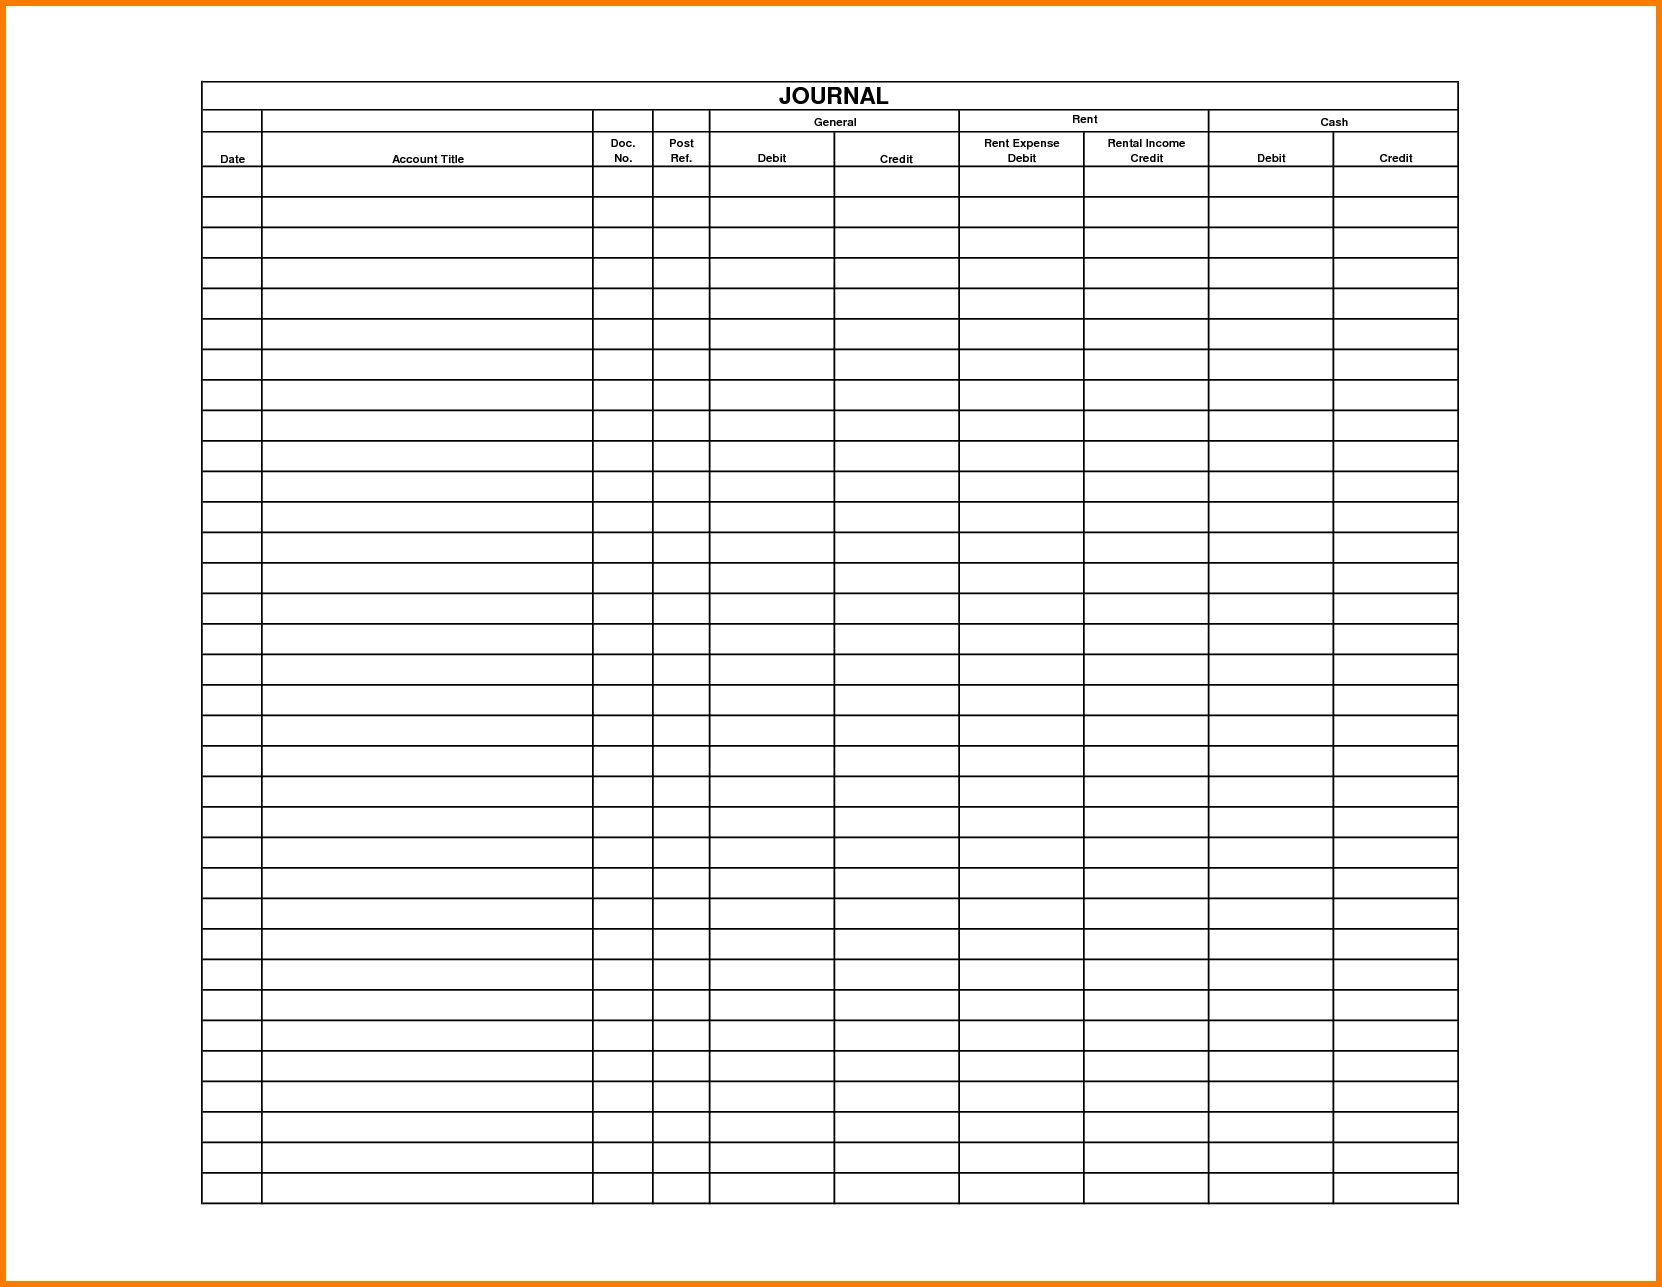 4 General Journal Template Receipt Templates For Accounting To